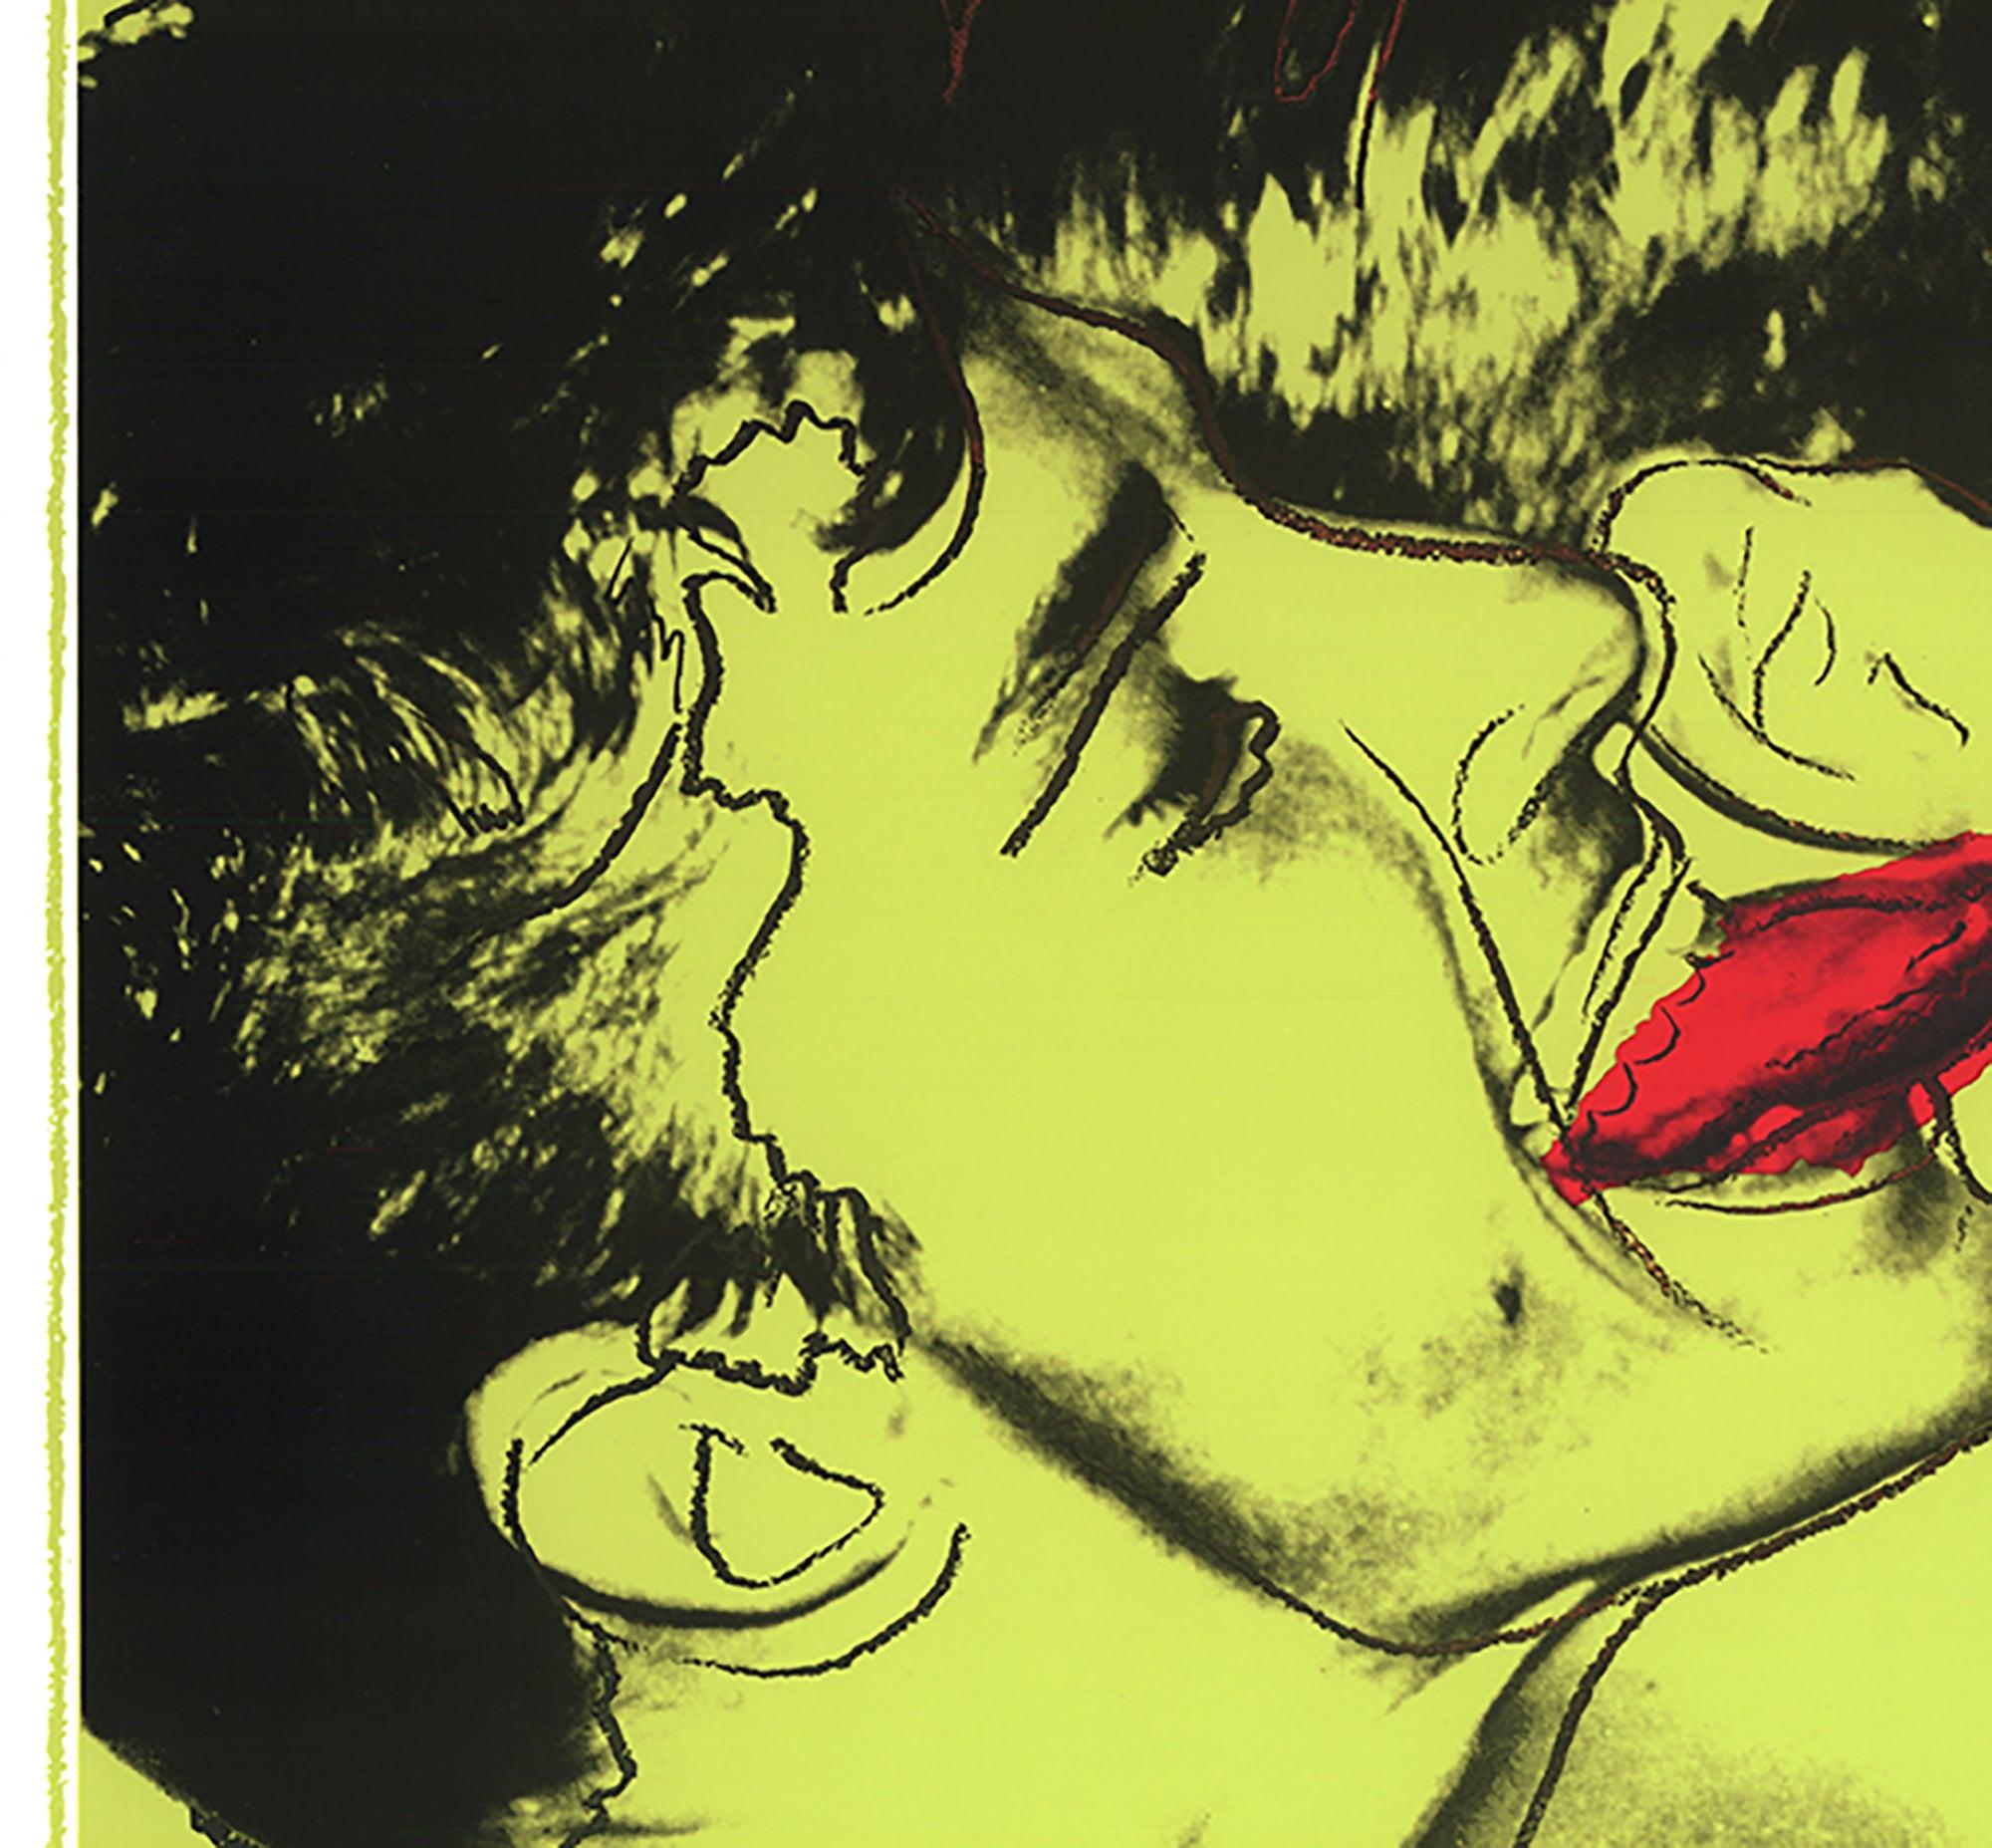 Andy Warhol-Querelle Green-FIRST EDITION - Pop Art Print by (after) Andy Warhol